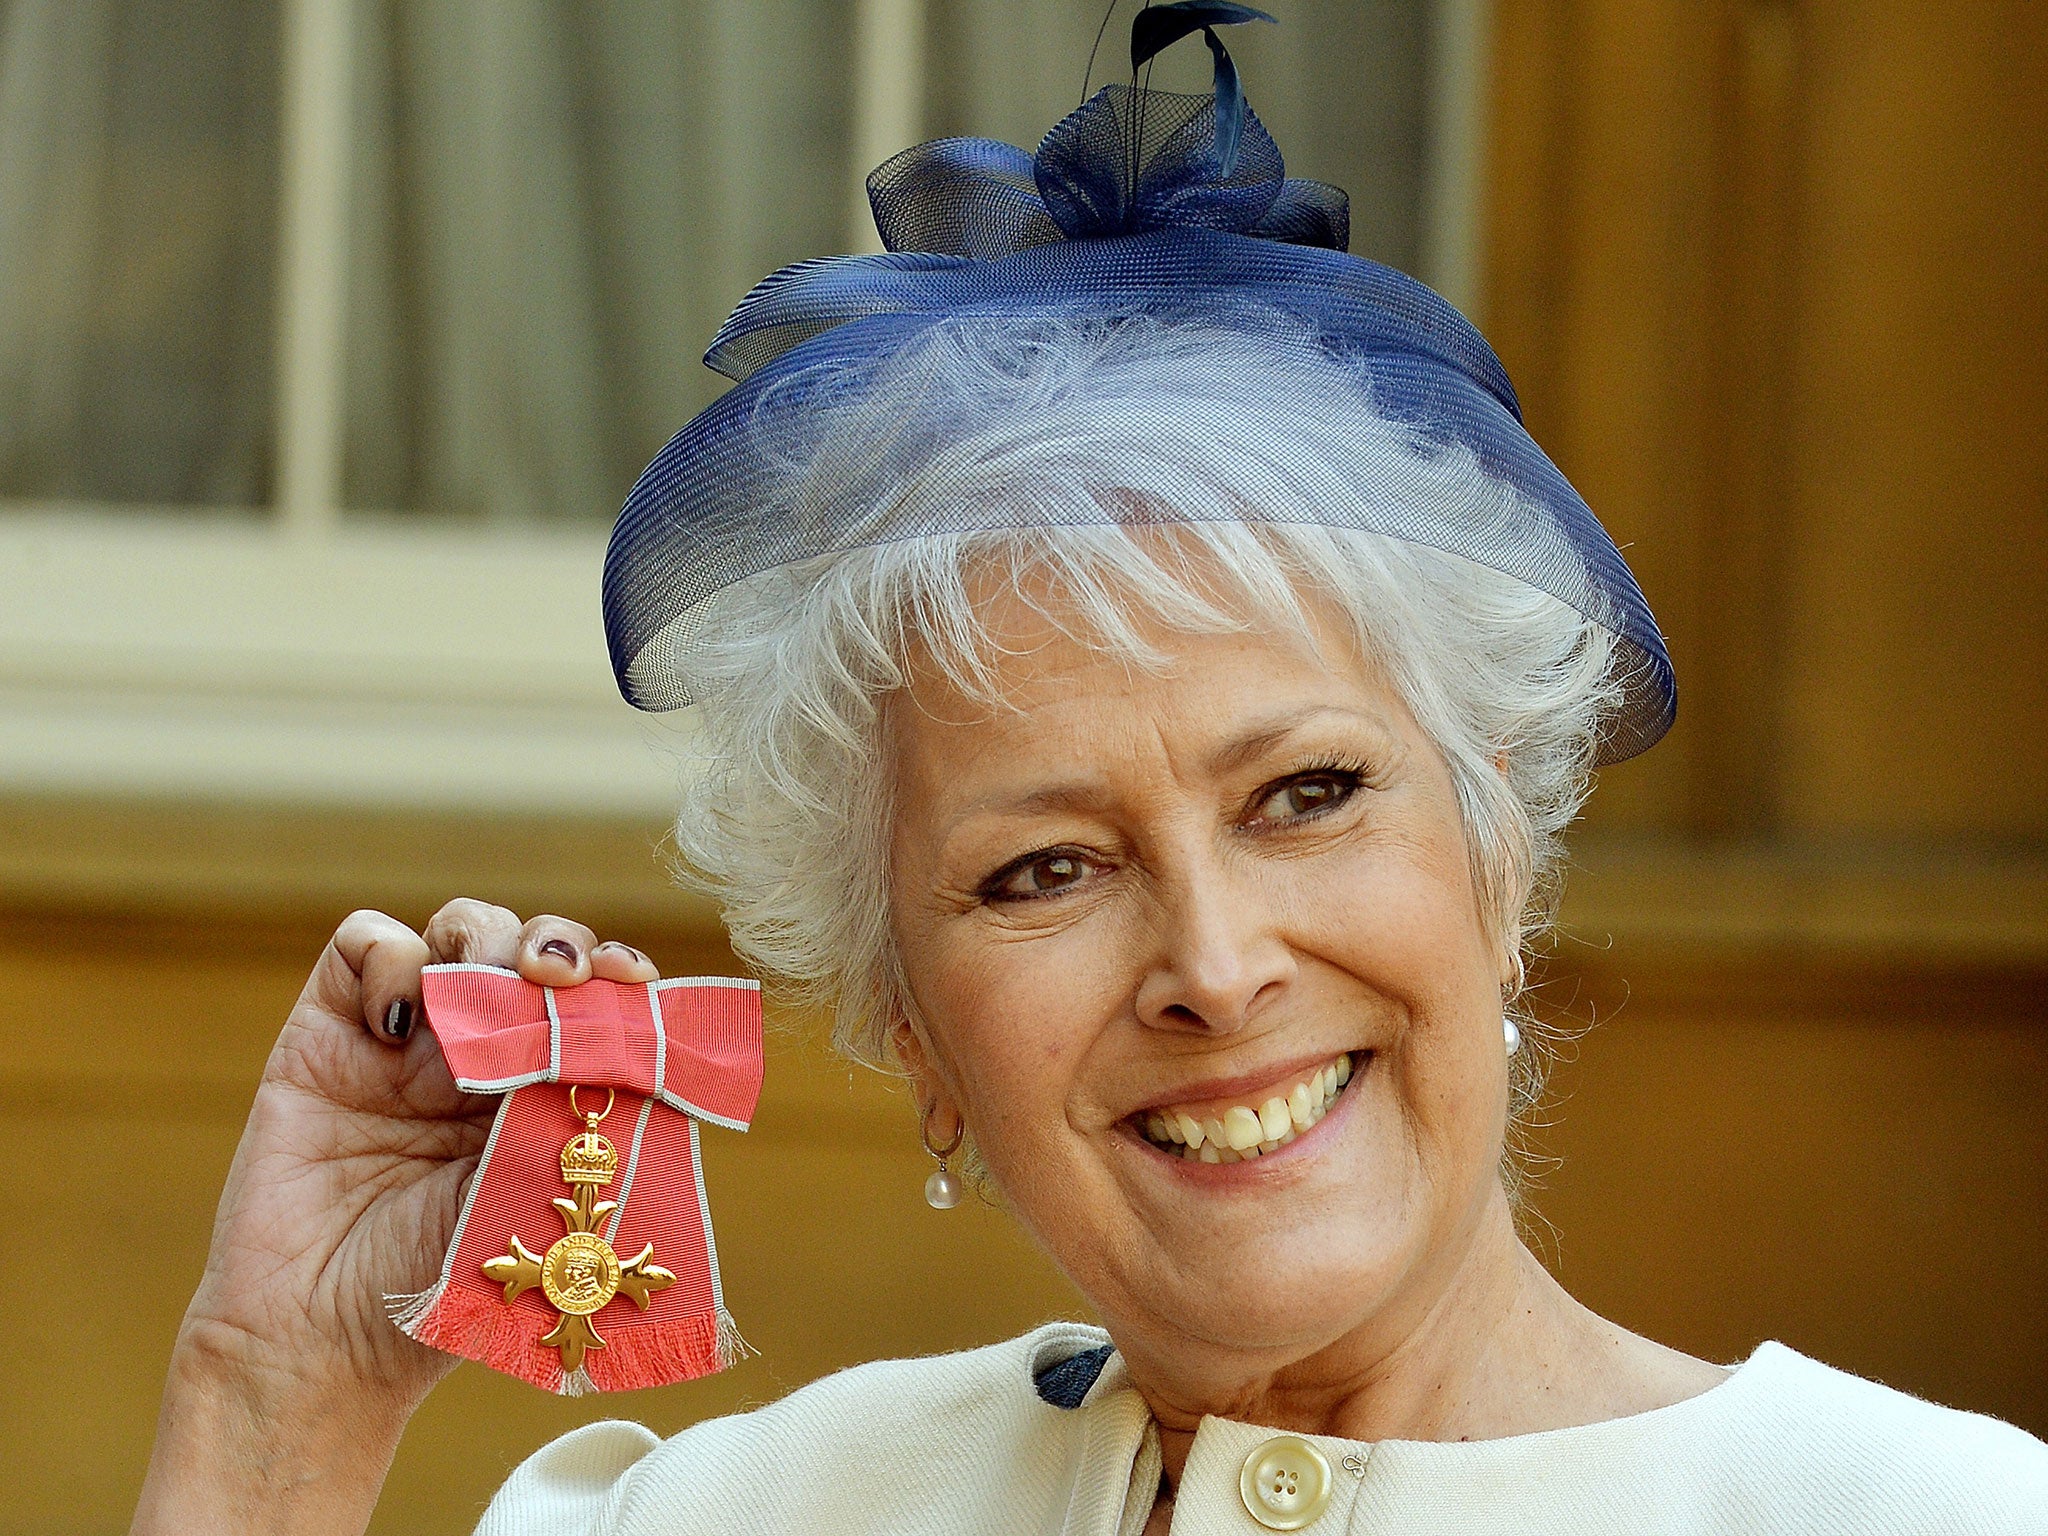 British actress Lynda Bellingham poses holding her medal after being invested as an Officer of the Order of the British Empire (OBE) during a ceremony at Buckingham Palace in central London on March 14, 2014.